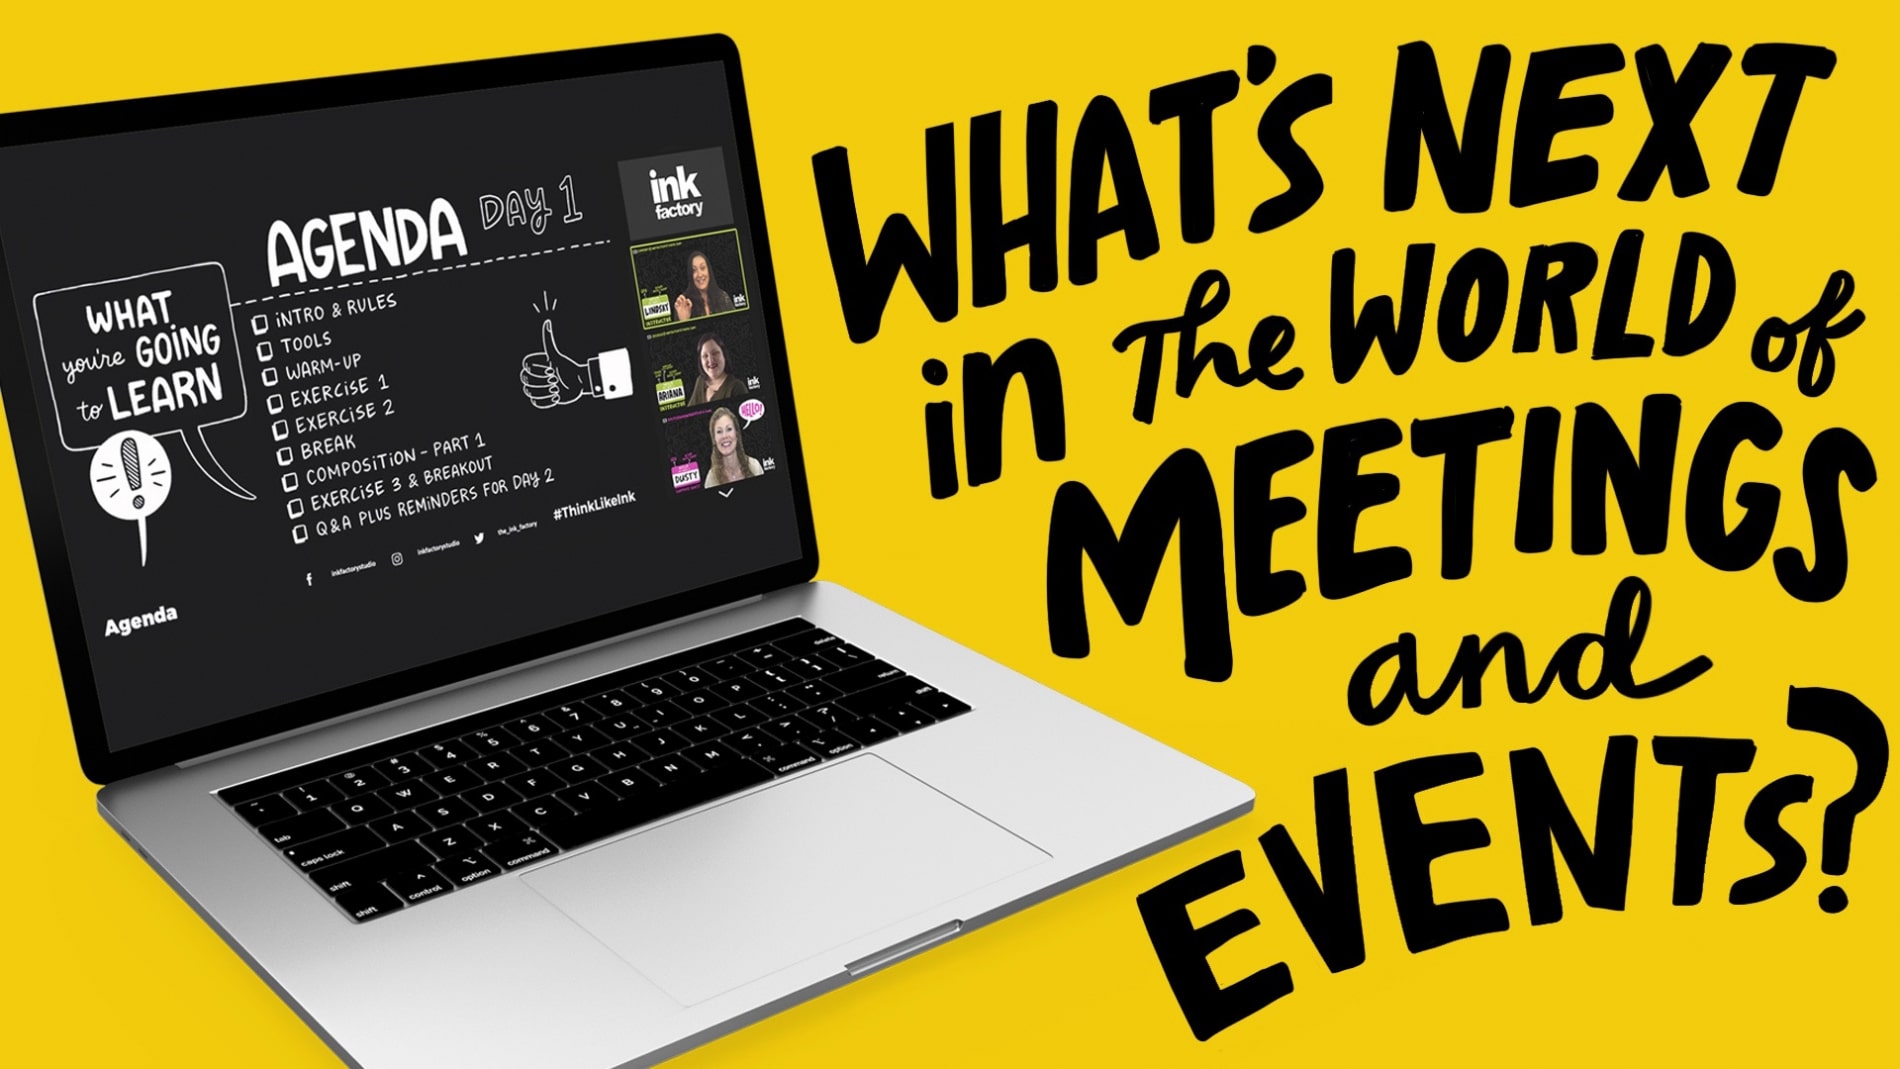 What’s Next In The World of Meetings and Events?